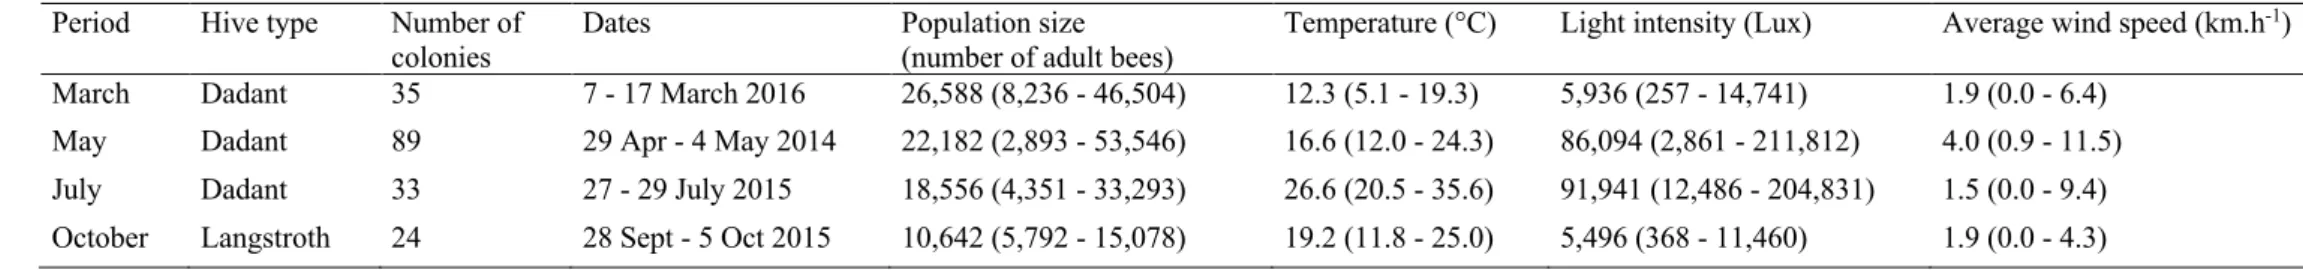 Table  A.1  Mean  (minimum  –  maximum)  of  the  honey  bee  population  sizes  observed,  and  of  the  meteorological  conditions  encountered  during  each  observation period